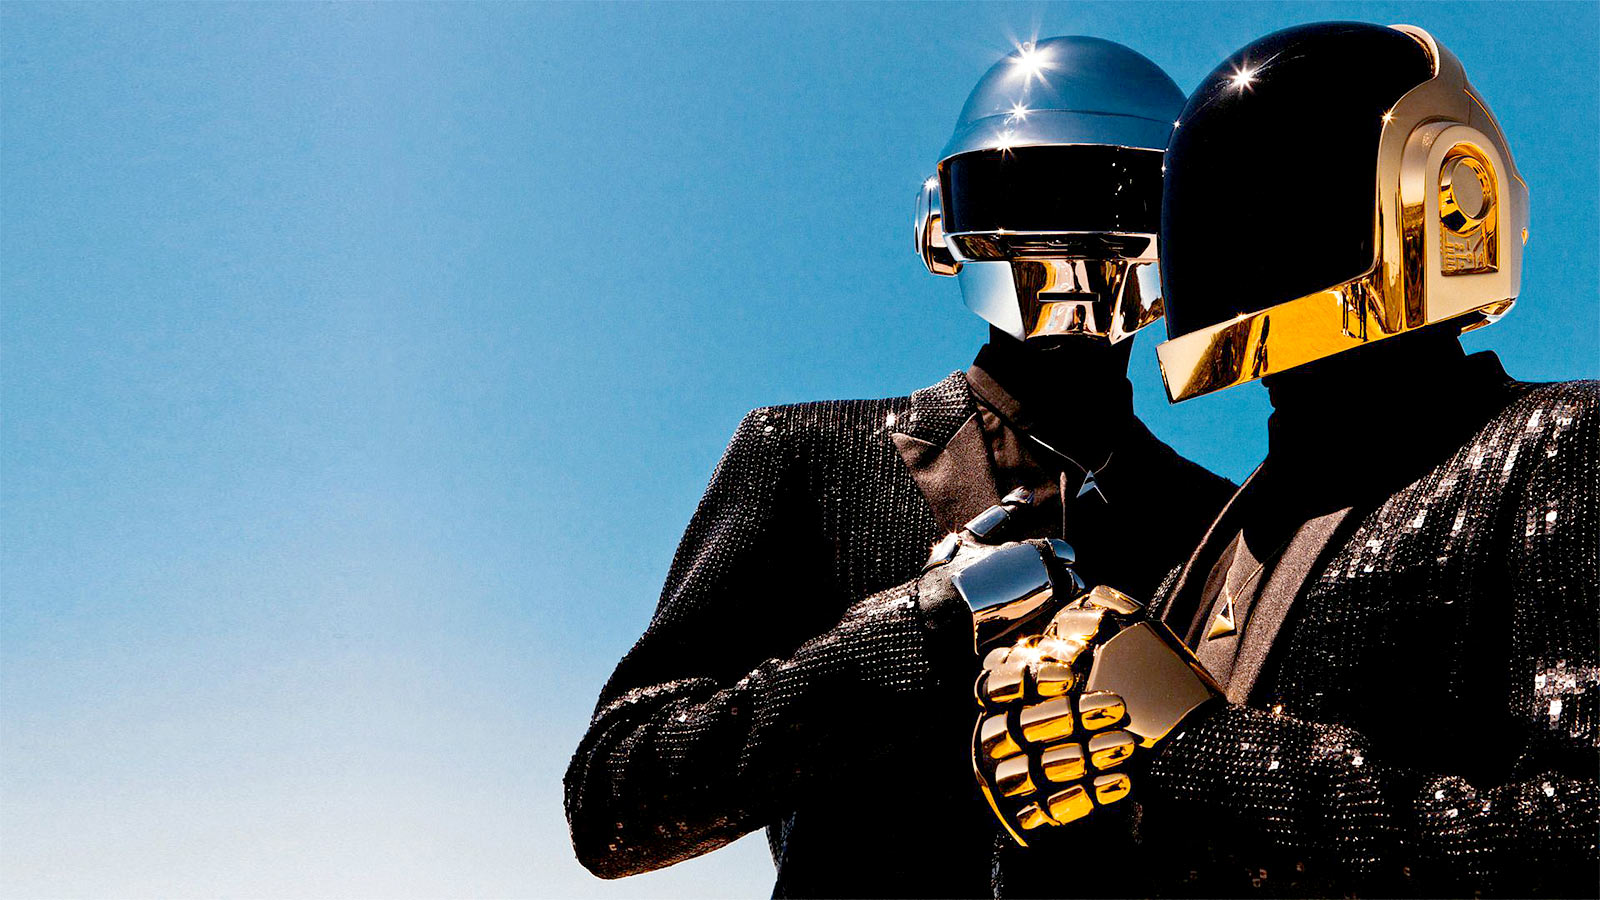 Daft punk is a french electronic music group. 